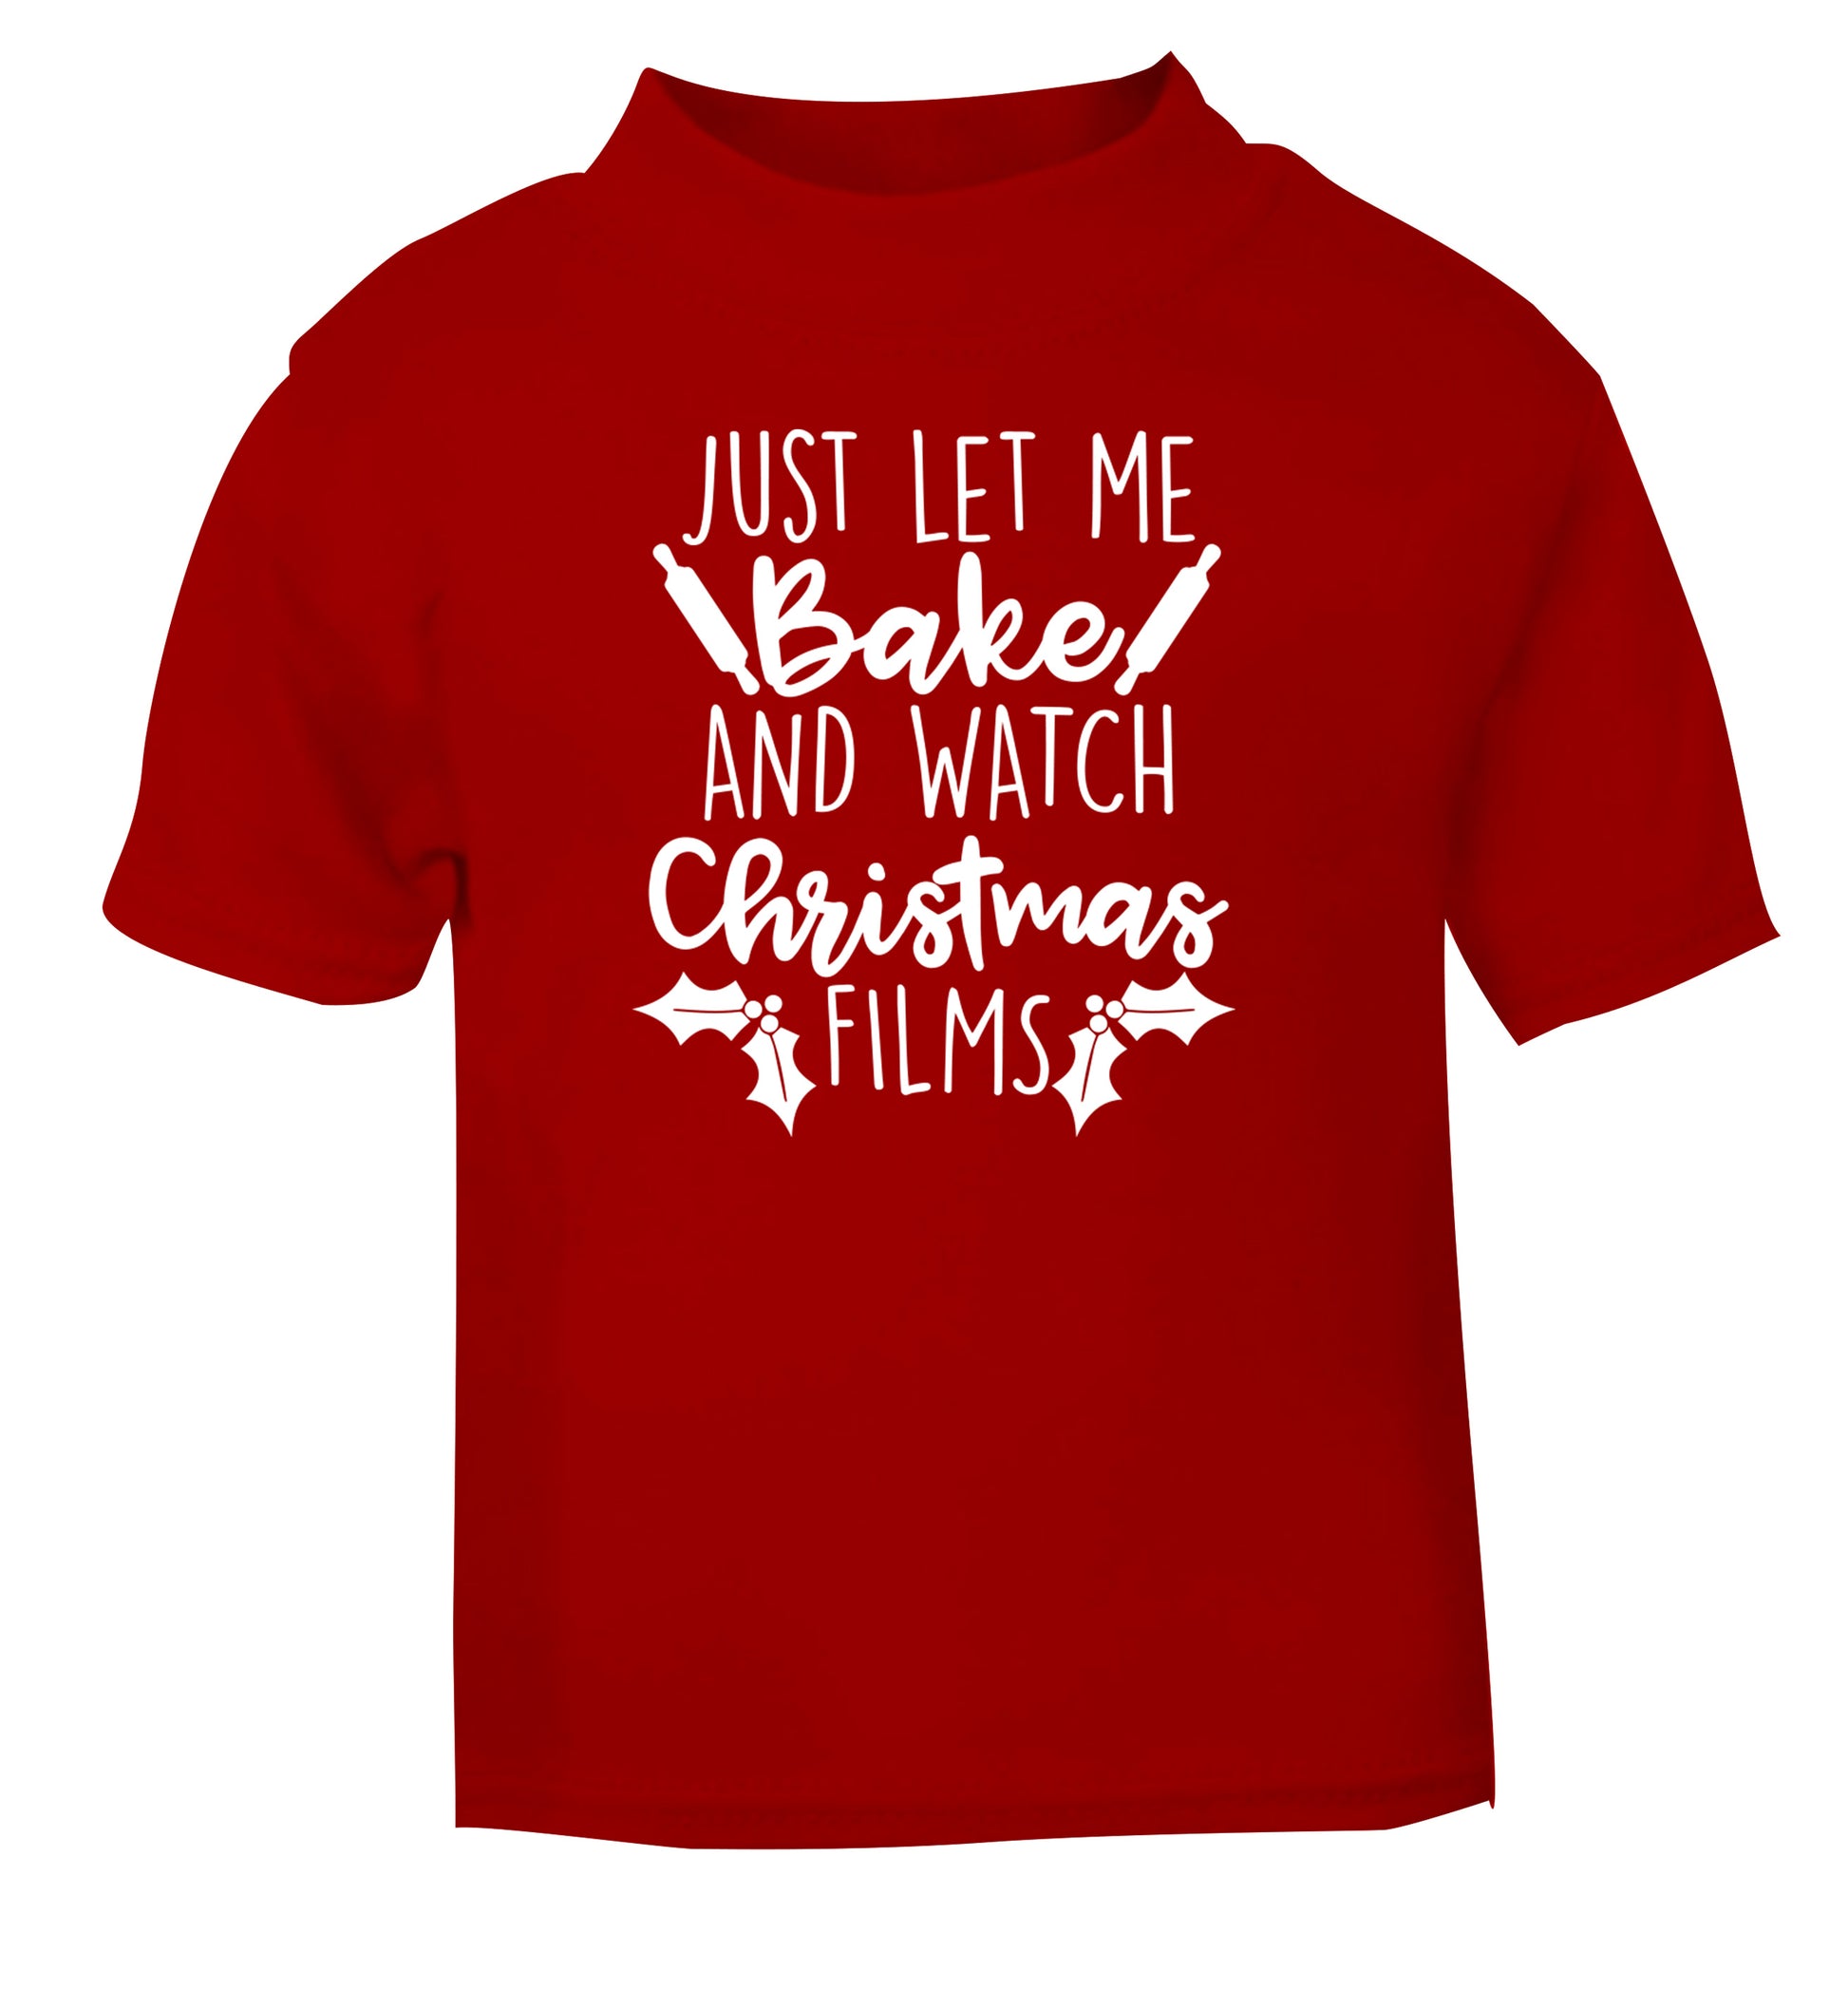 Just let me bake and watch Christmas films red Baby Toddler Tshirt 2 Years